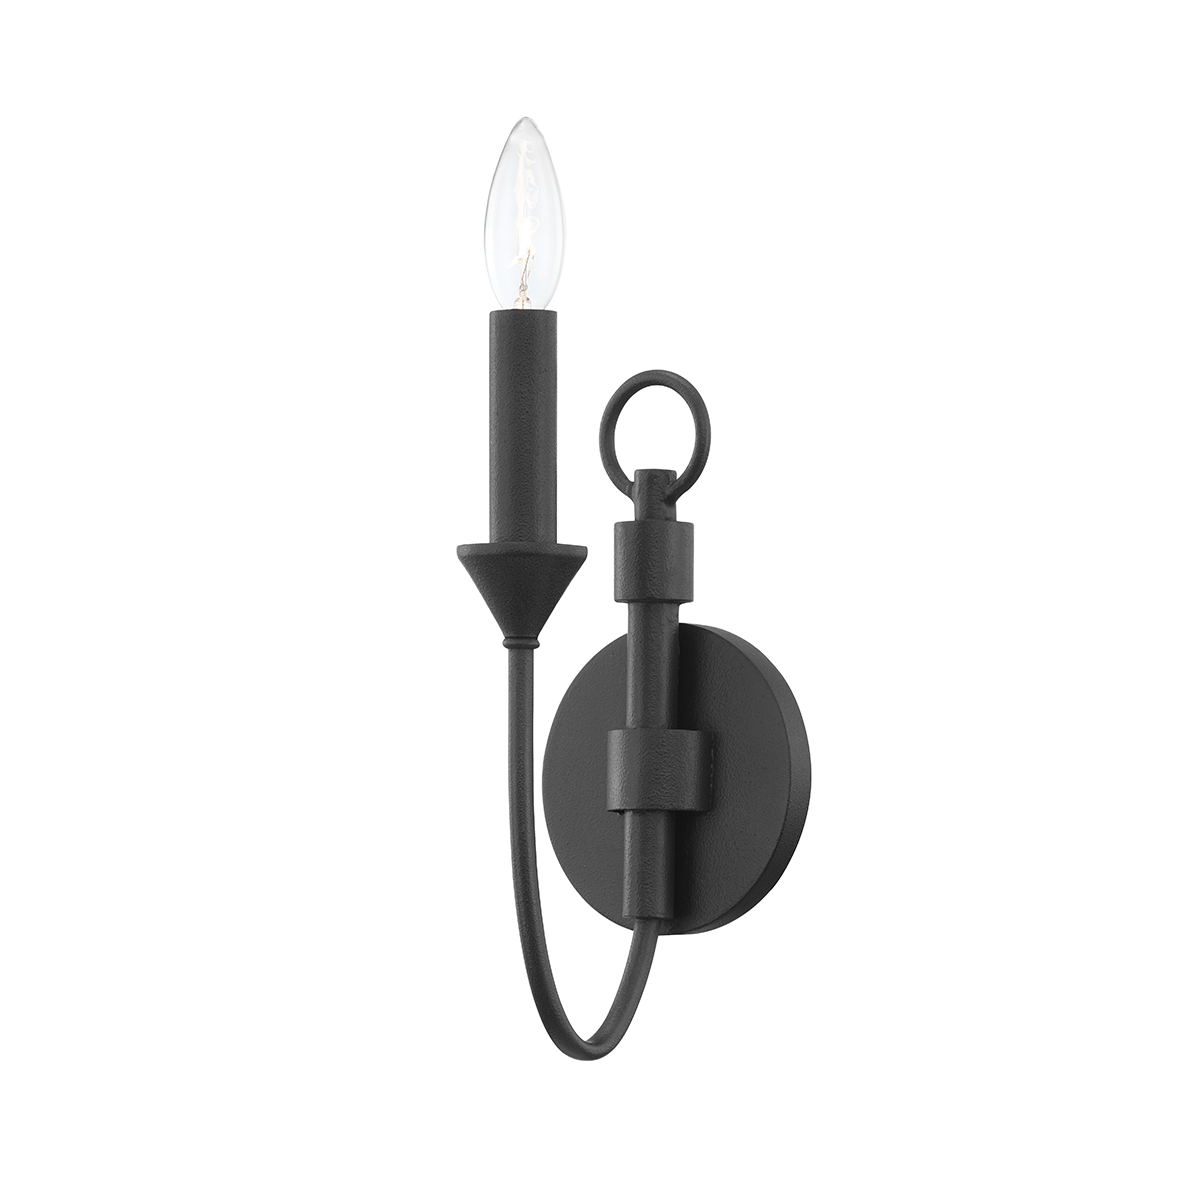 Troy Lighting Cate Wall Sconce Wall Sconce Troy Lighting FORGED IRON 4.5x4.5x14 